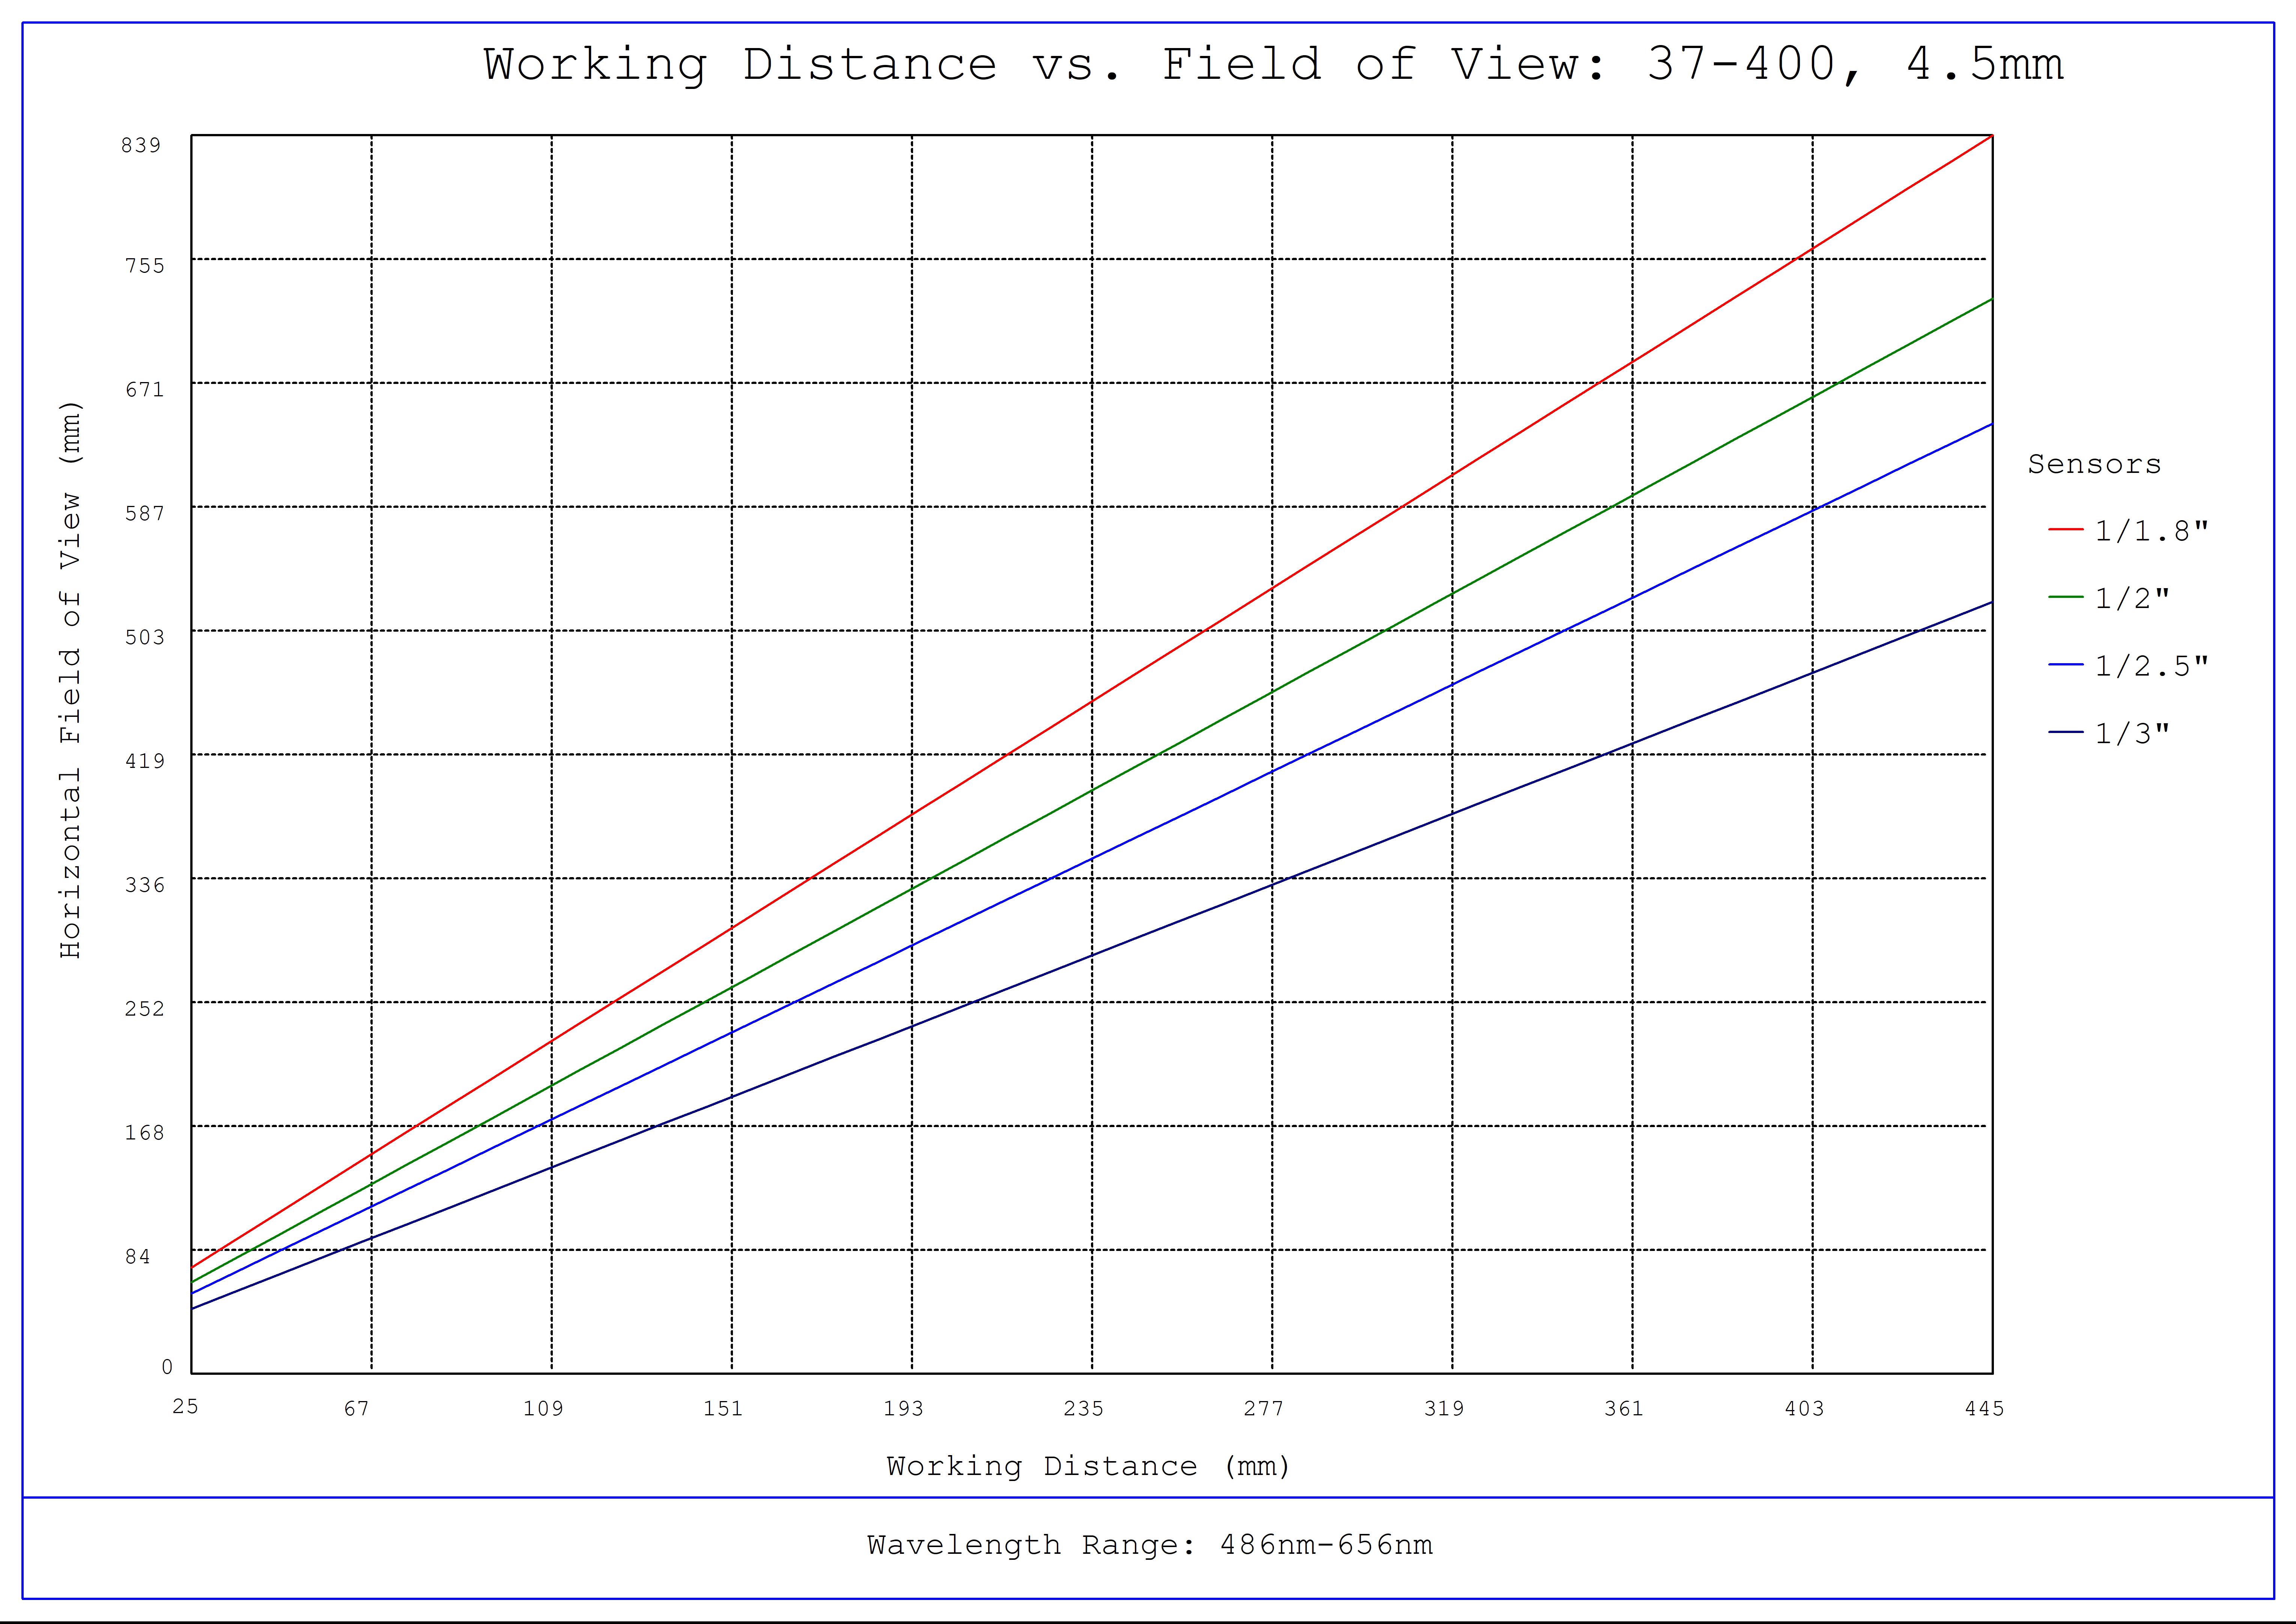 #37-400, 4.5mm, f/4 Cr Series Fixed Focal Length Lens, Working Distance versus Field of View Plot